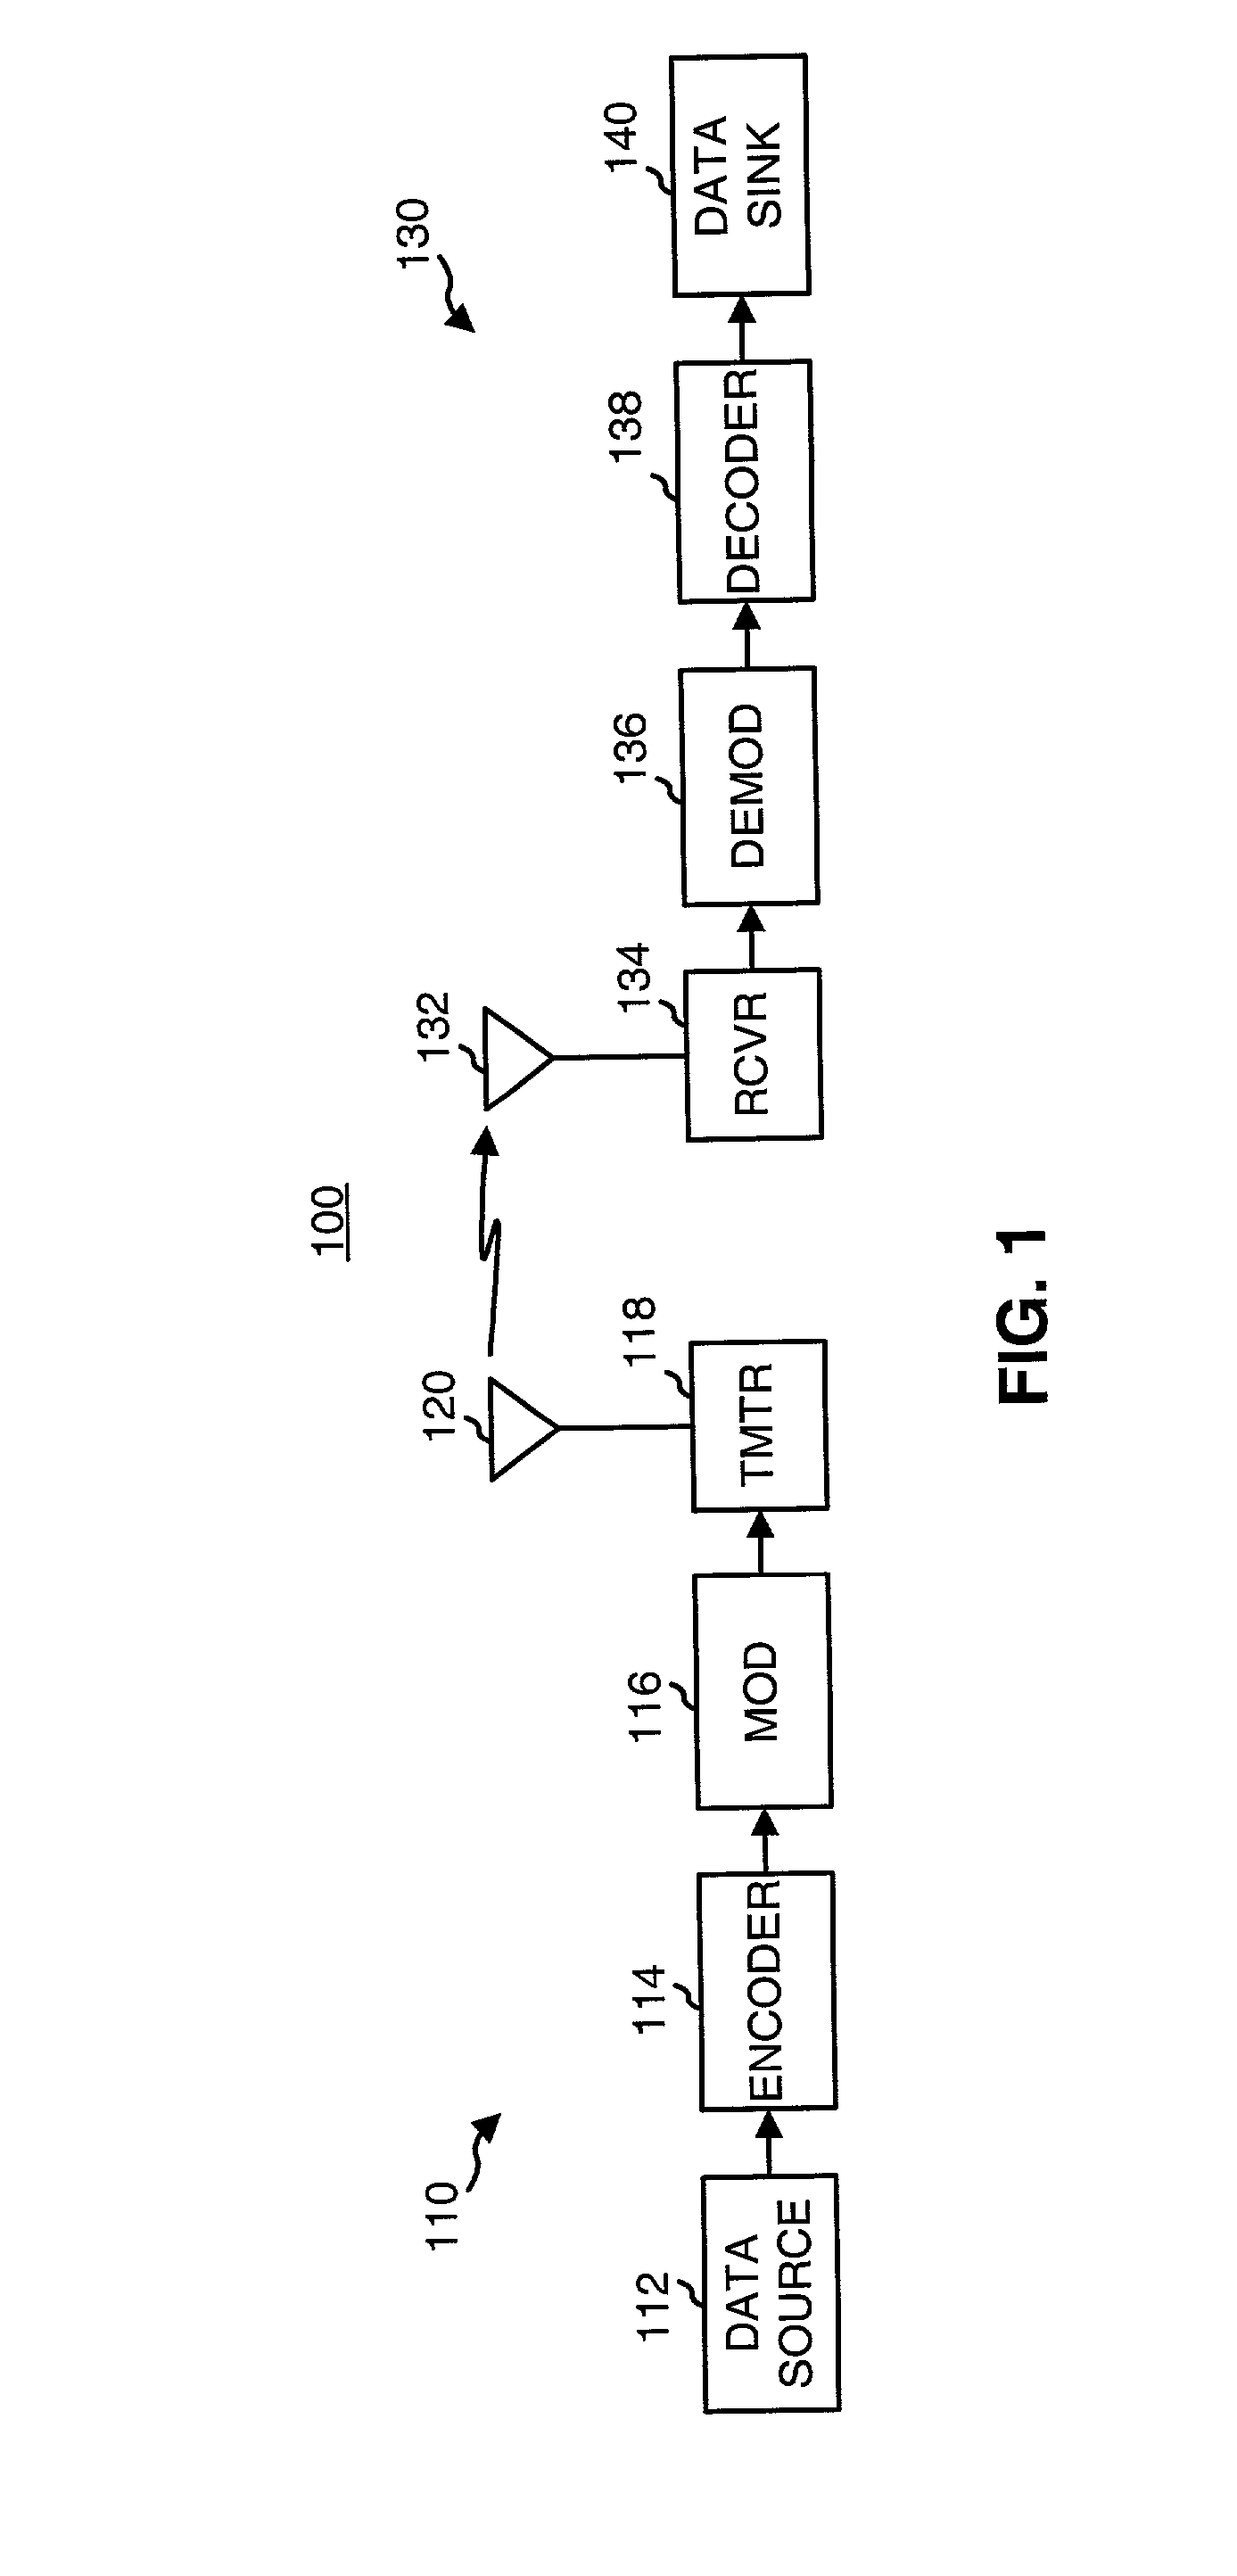 Method and apparatus for coding bits of data in parallel